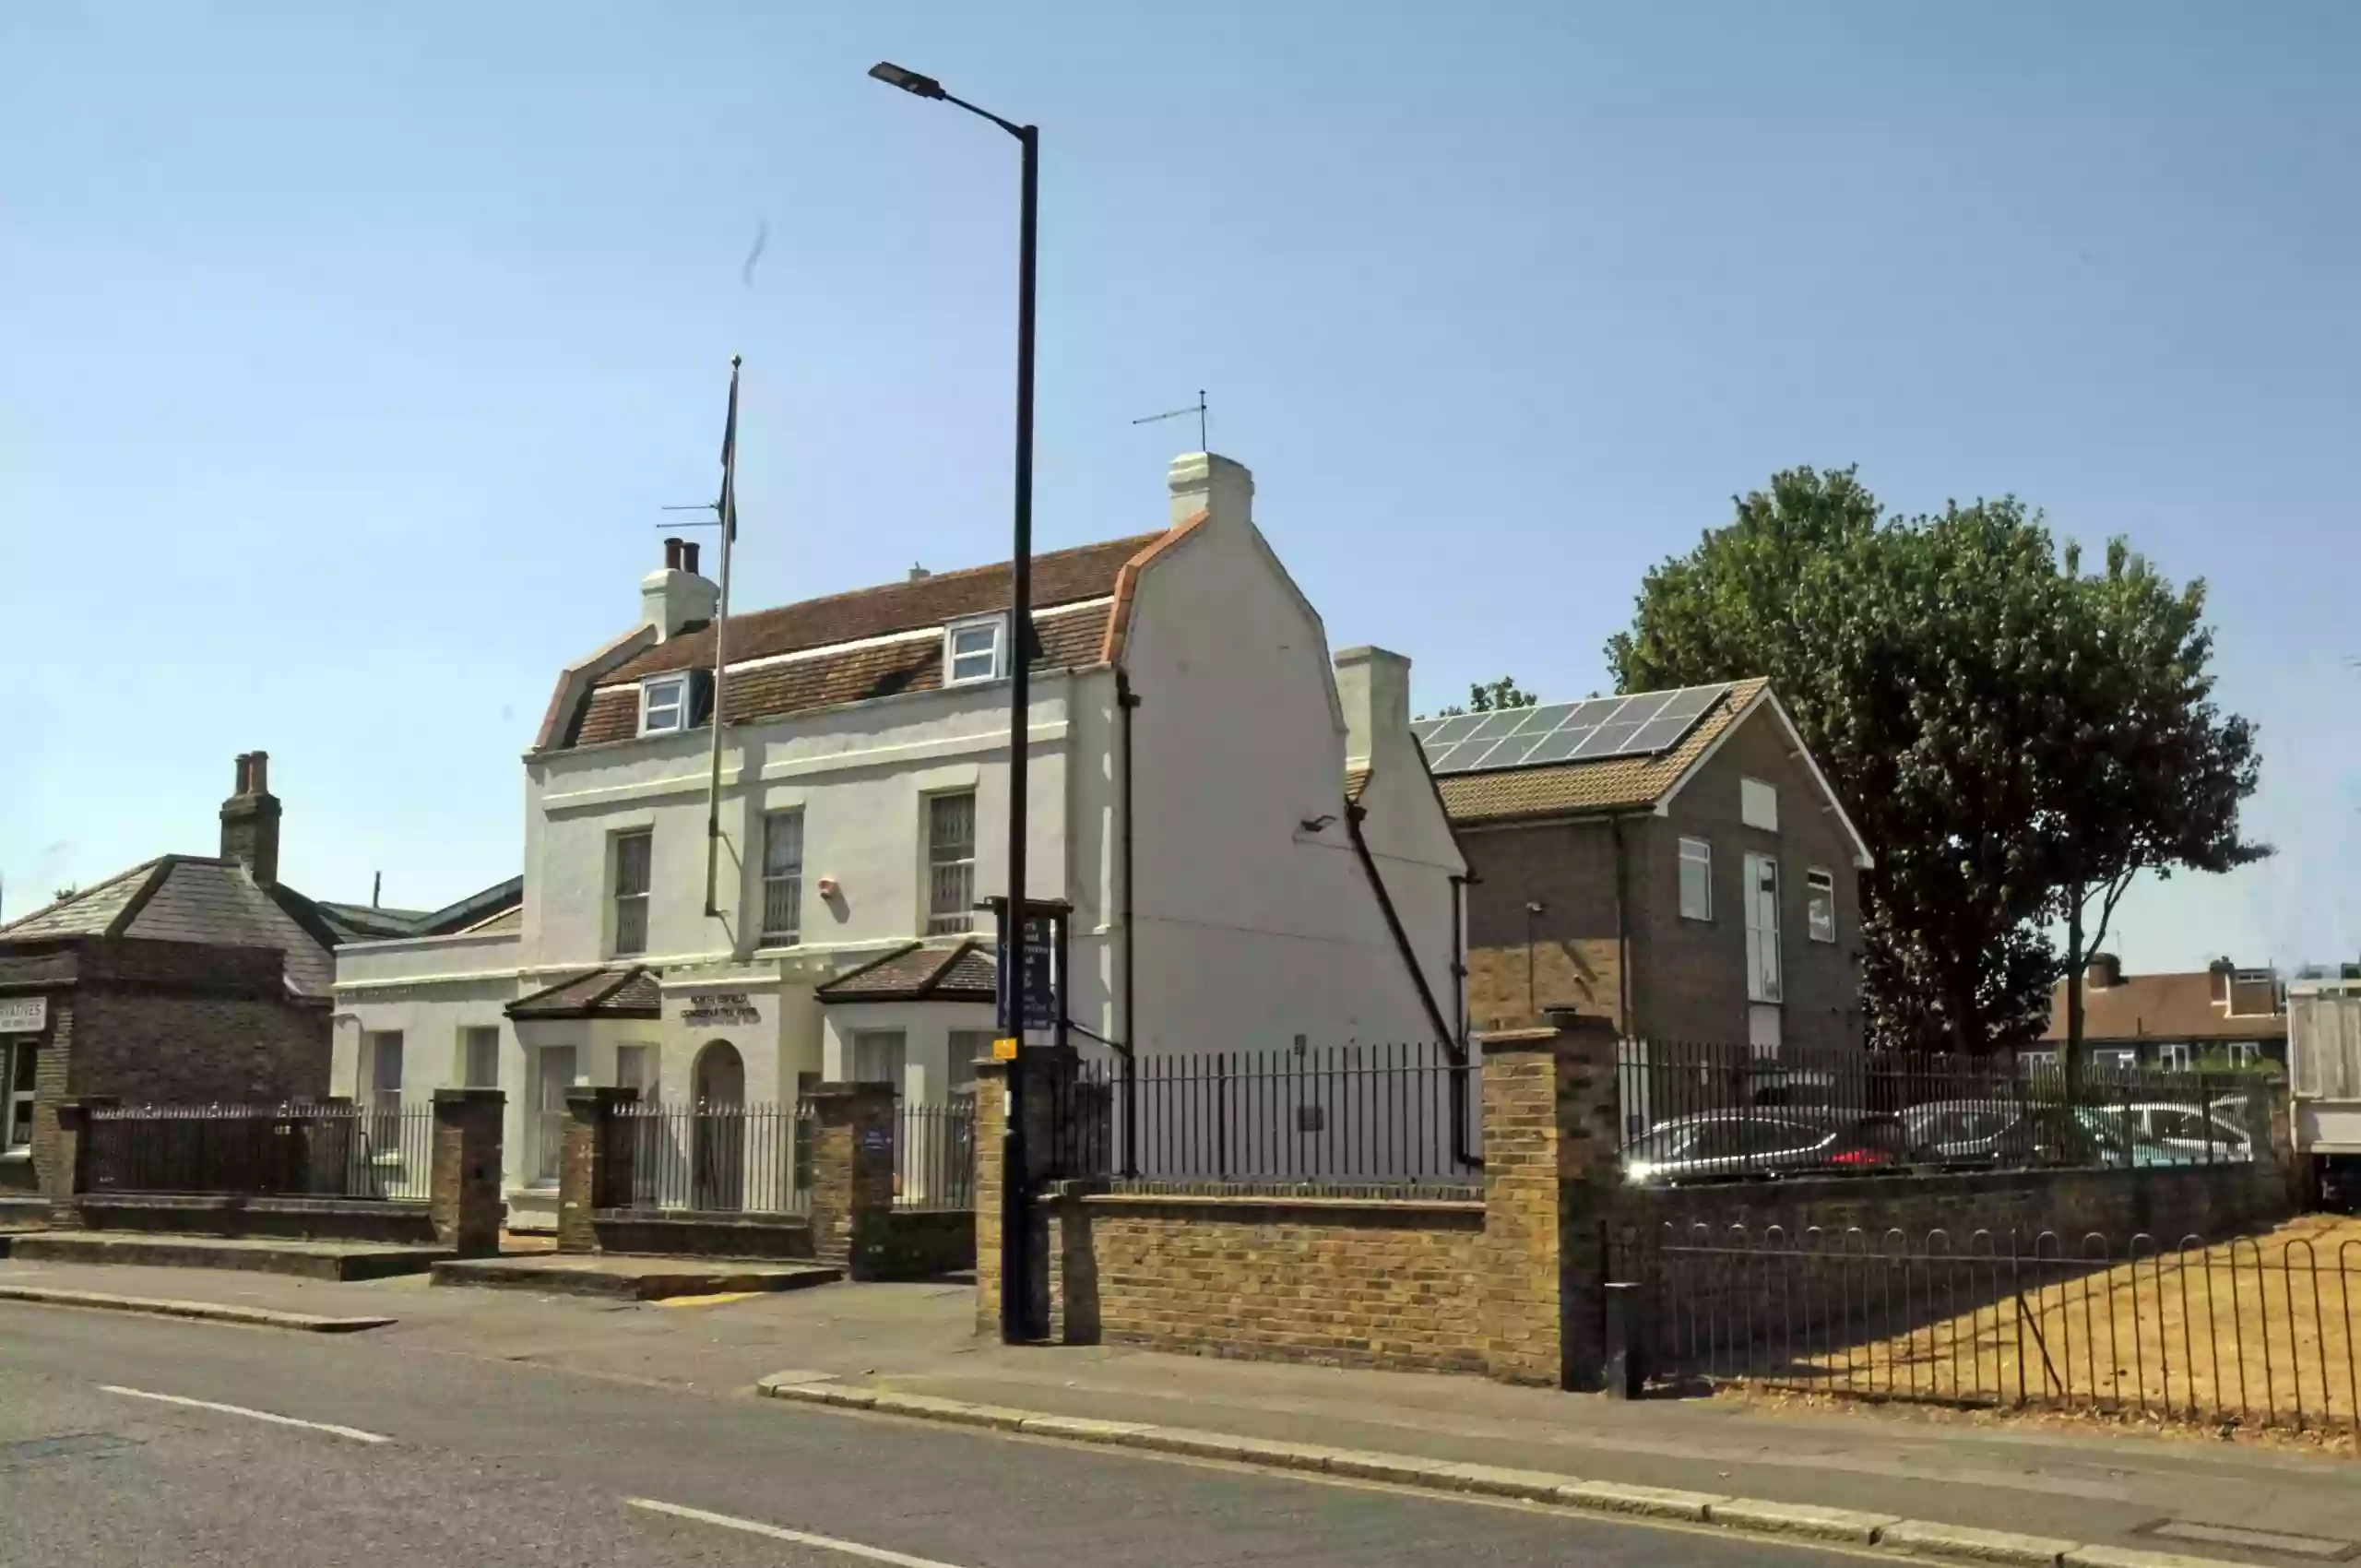 North Enfield Conservative Club